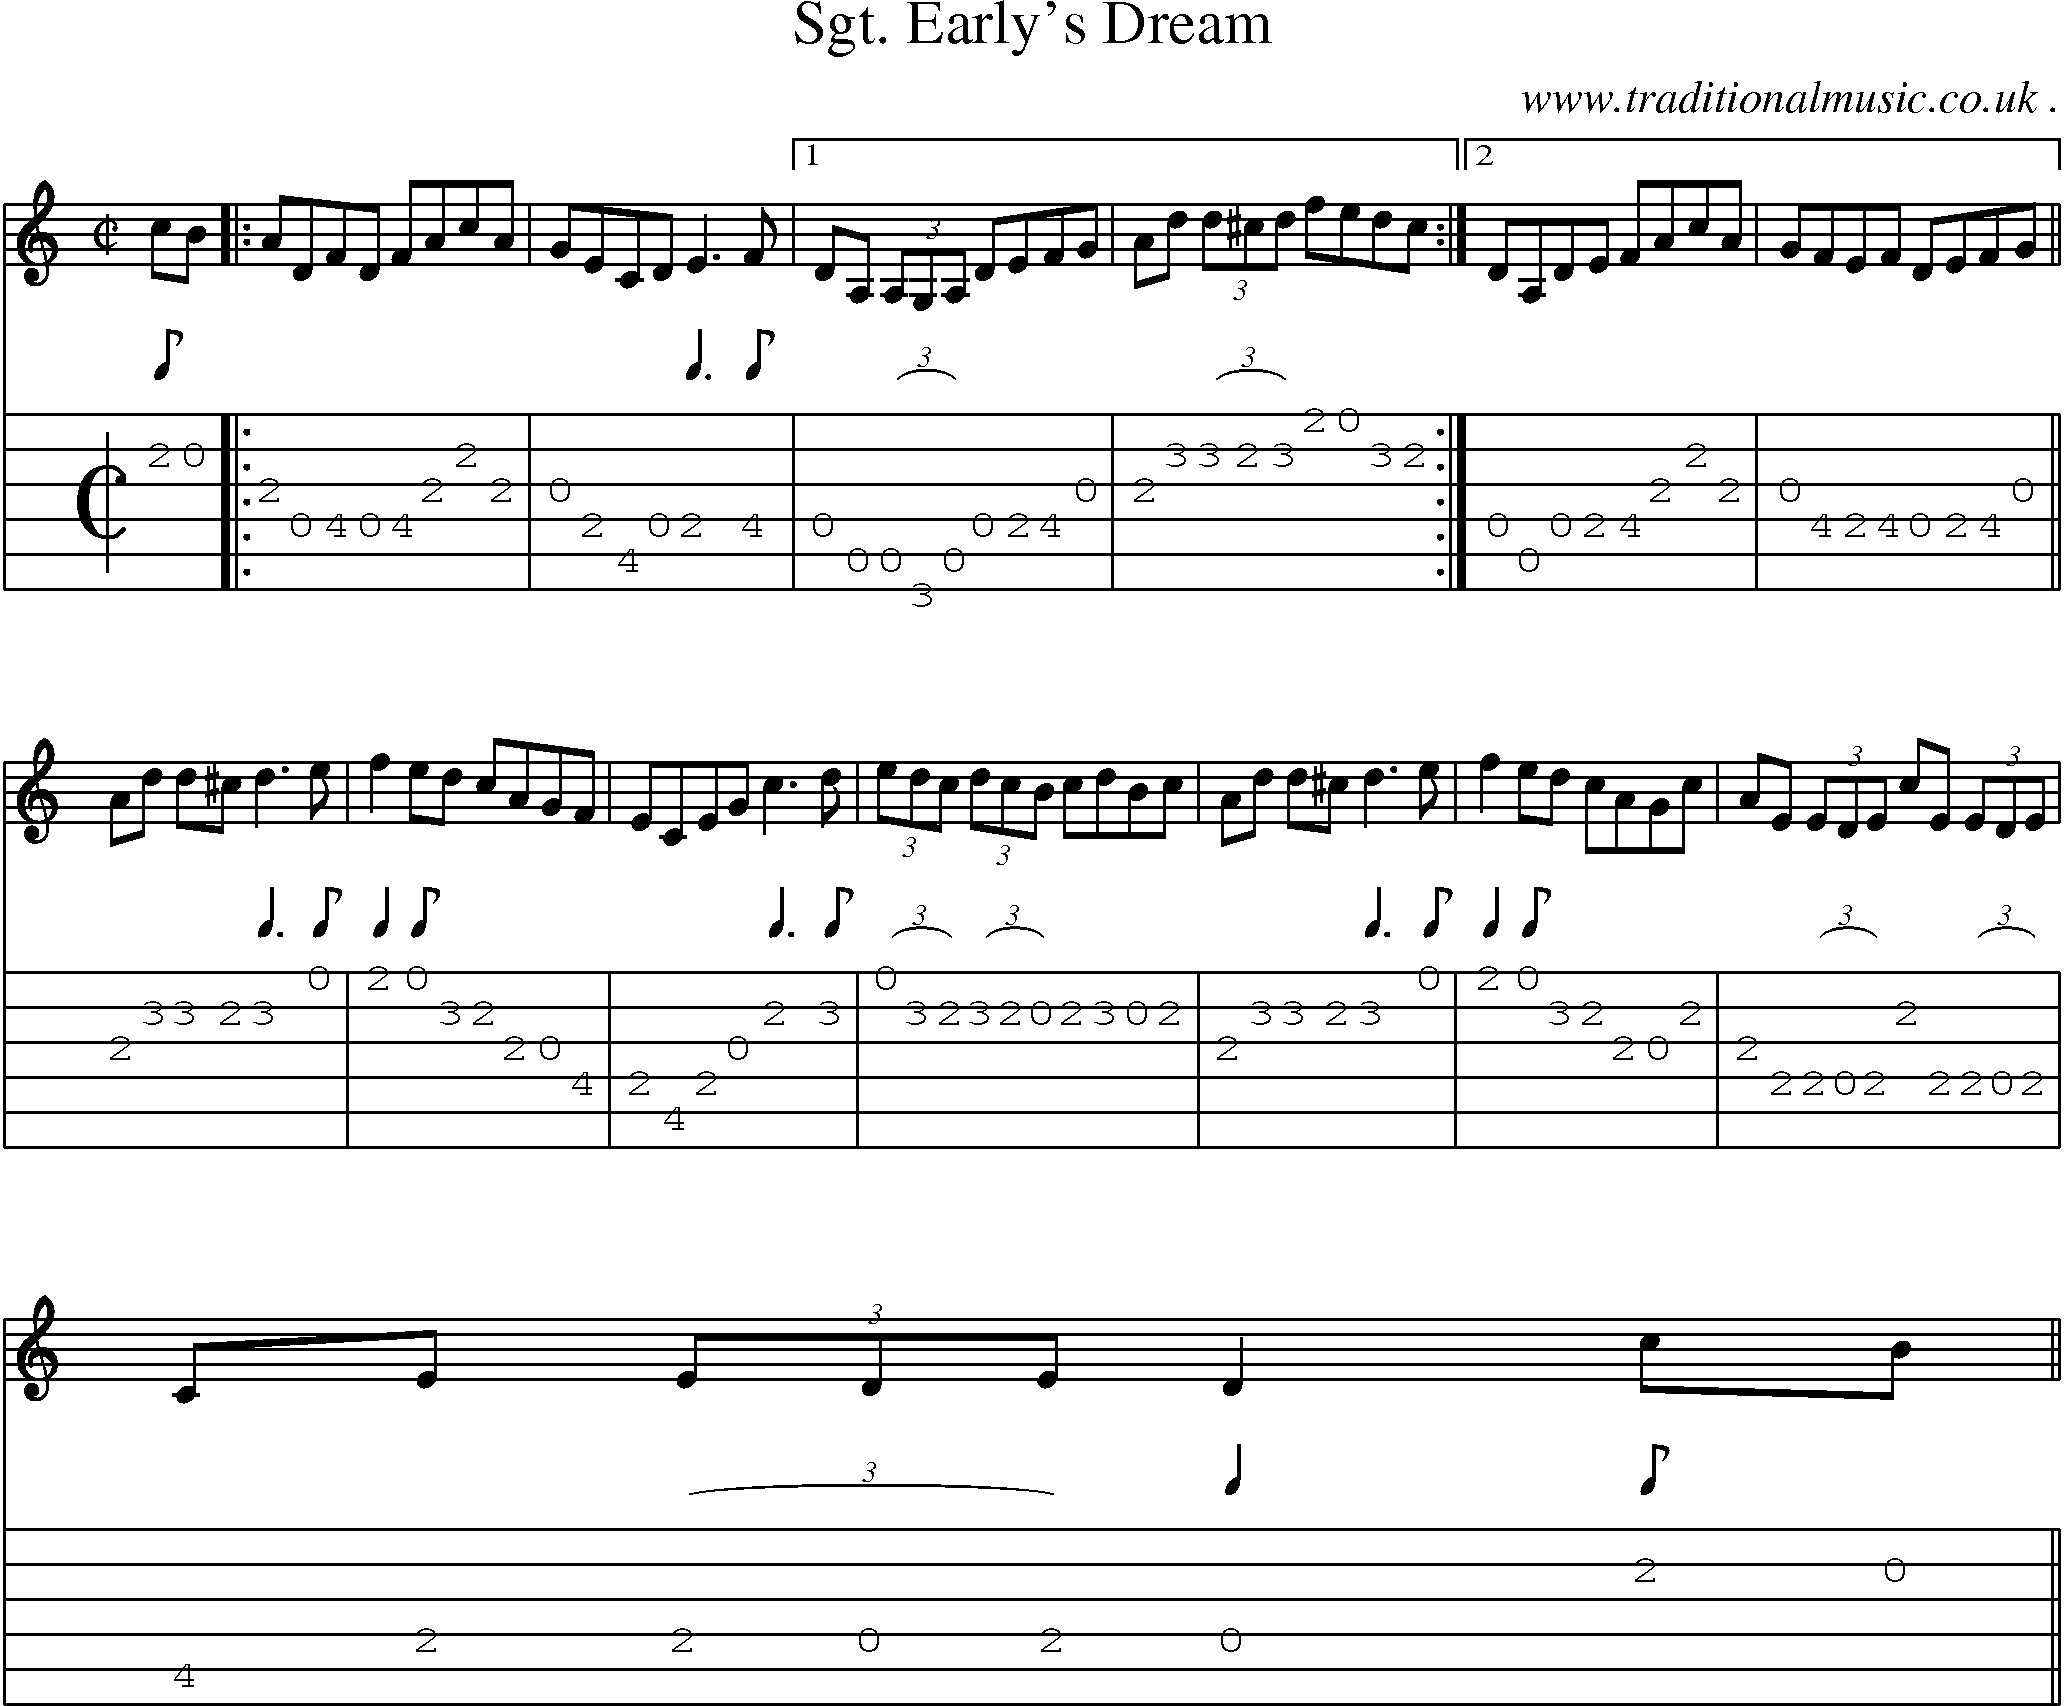 Sheet-Music and Guitar Tabs for Sgt Earlys Dream